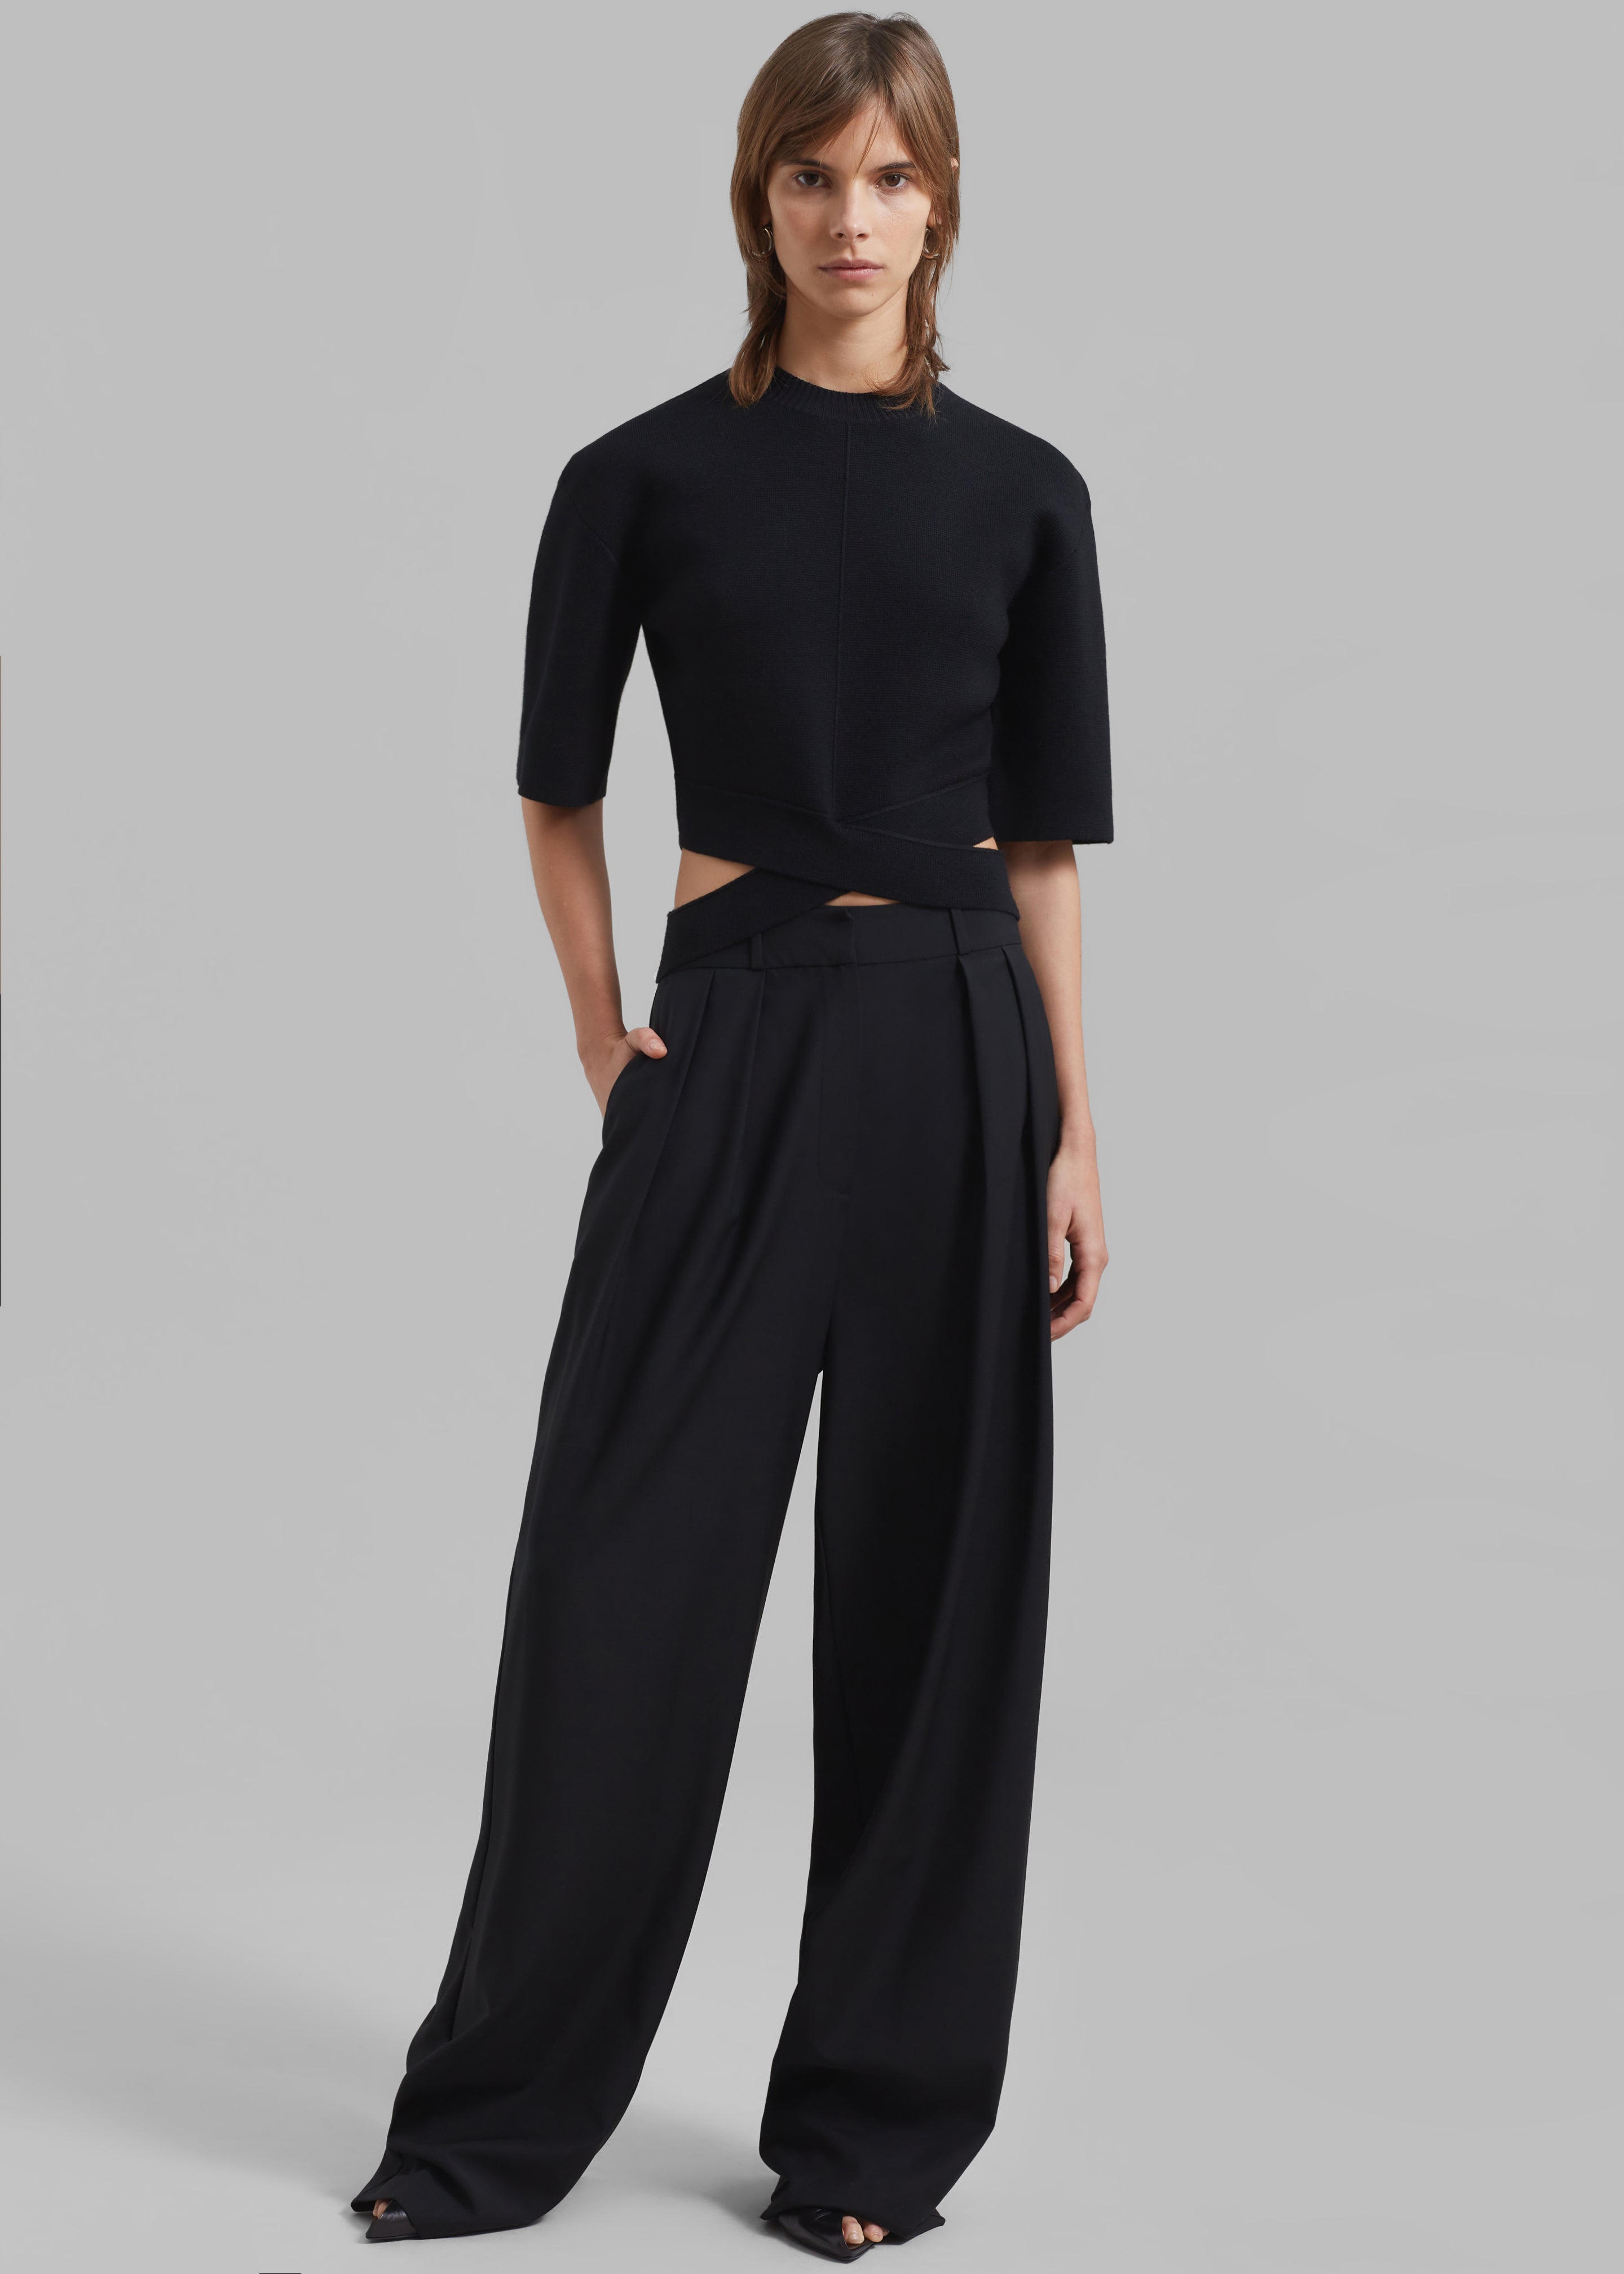 Ripley Pleated Trousers - Black - 4